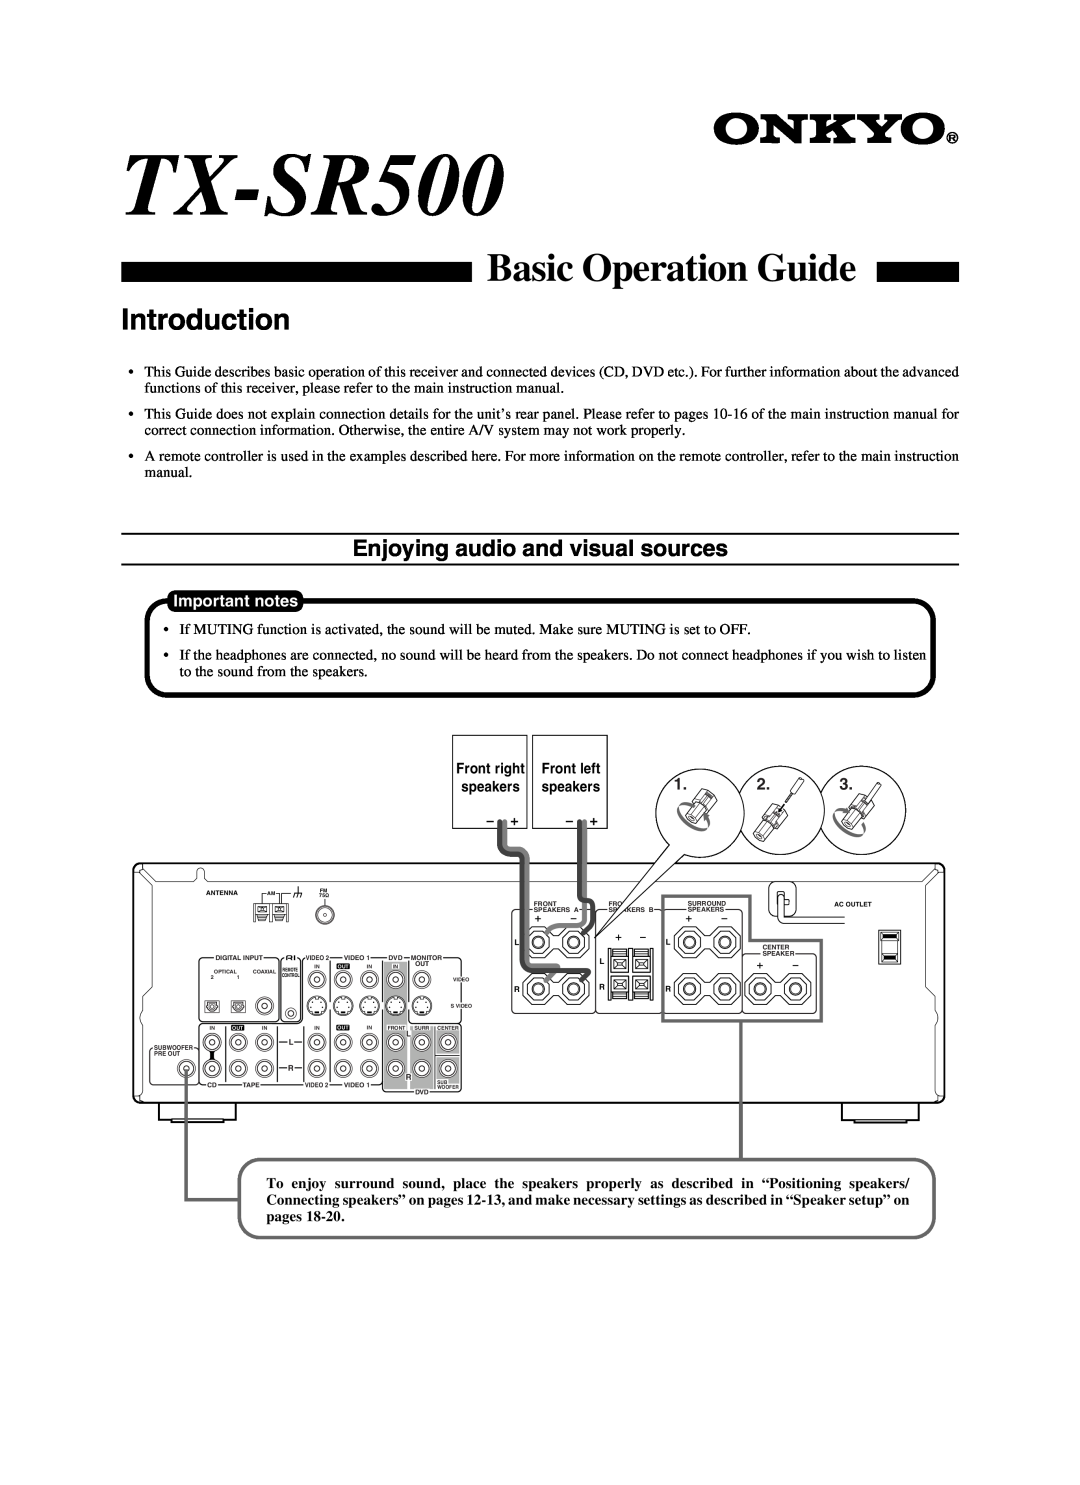 Onkyo TX-SR500 instruction manual Introduction, Front right speakers, Basic Operation Guide, Important notes 